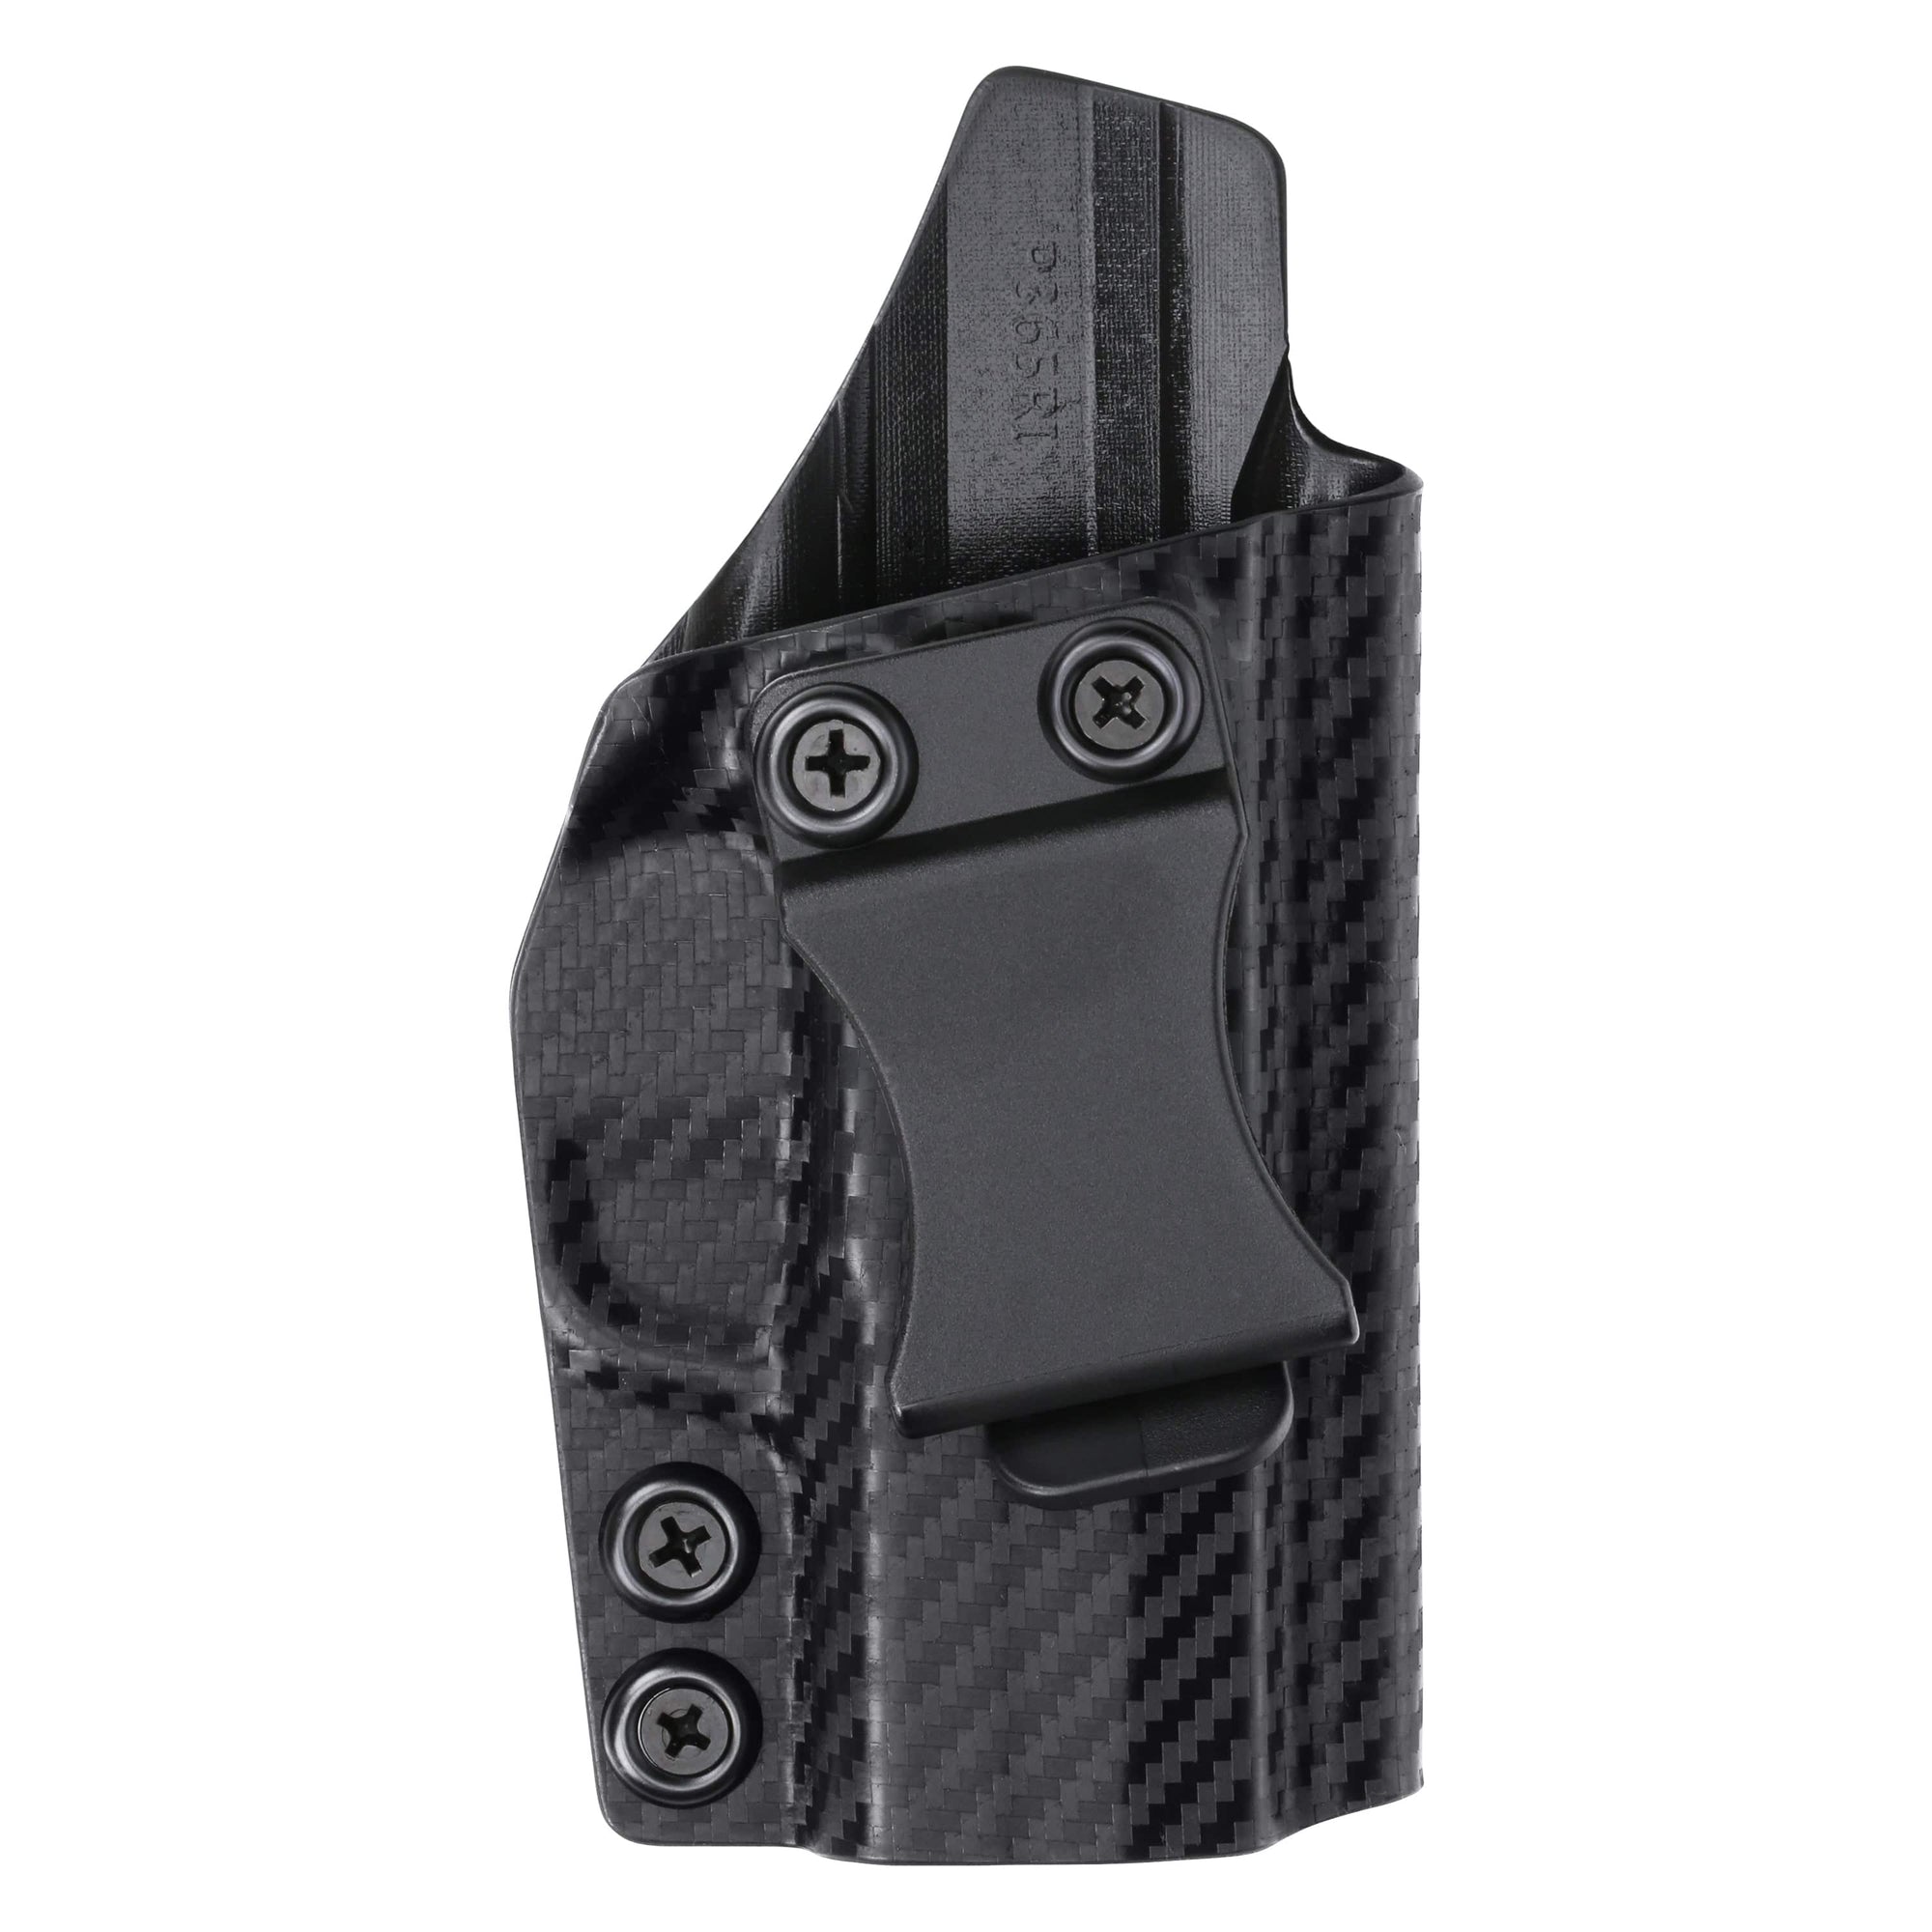 CZ Shadow 2 Compact Holsters